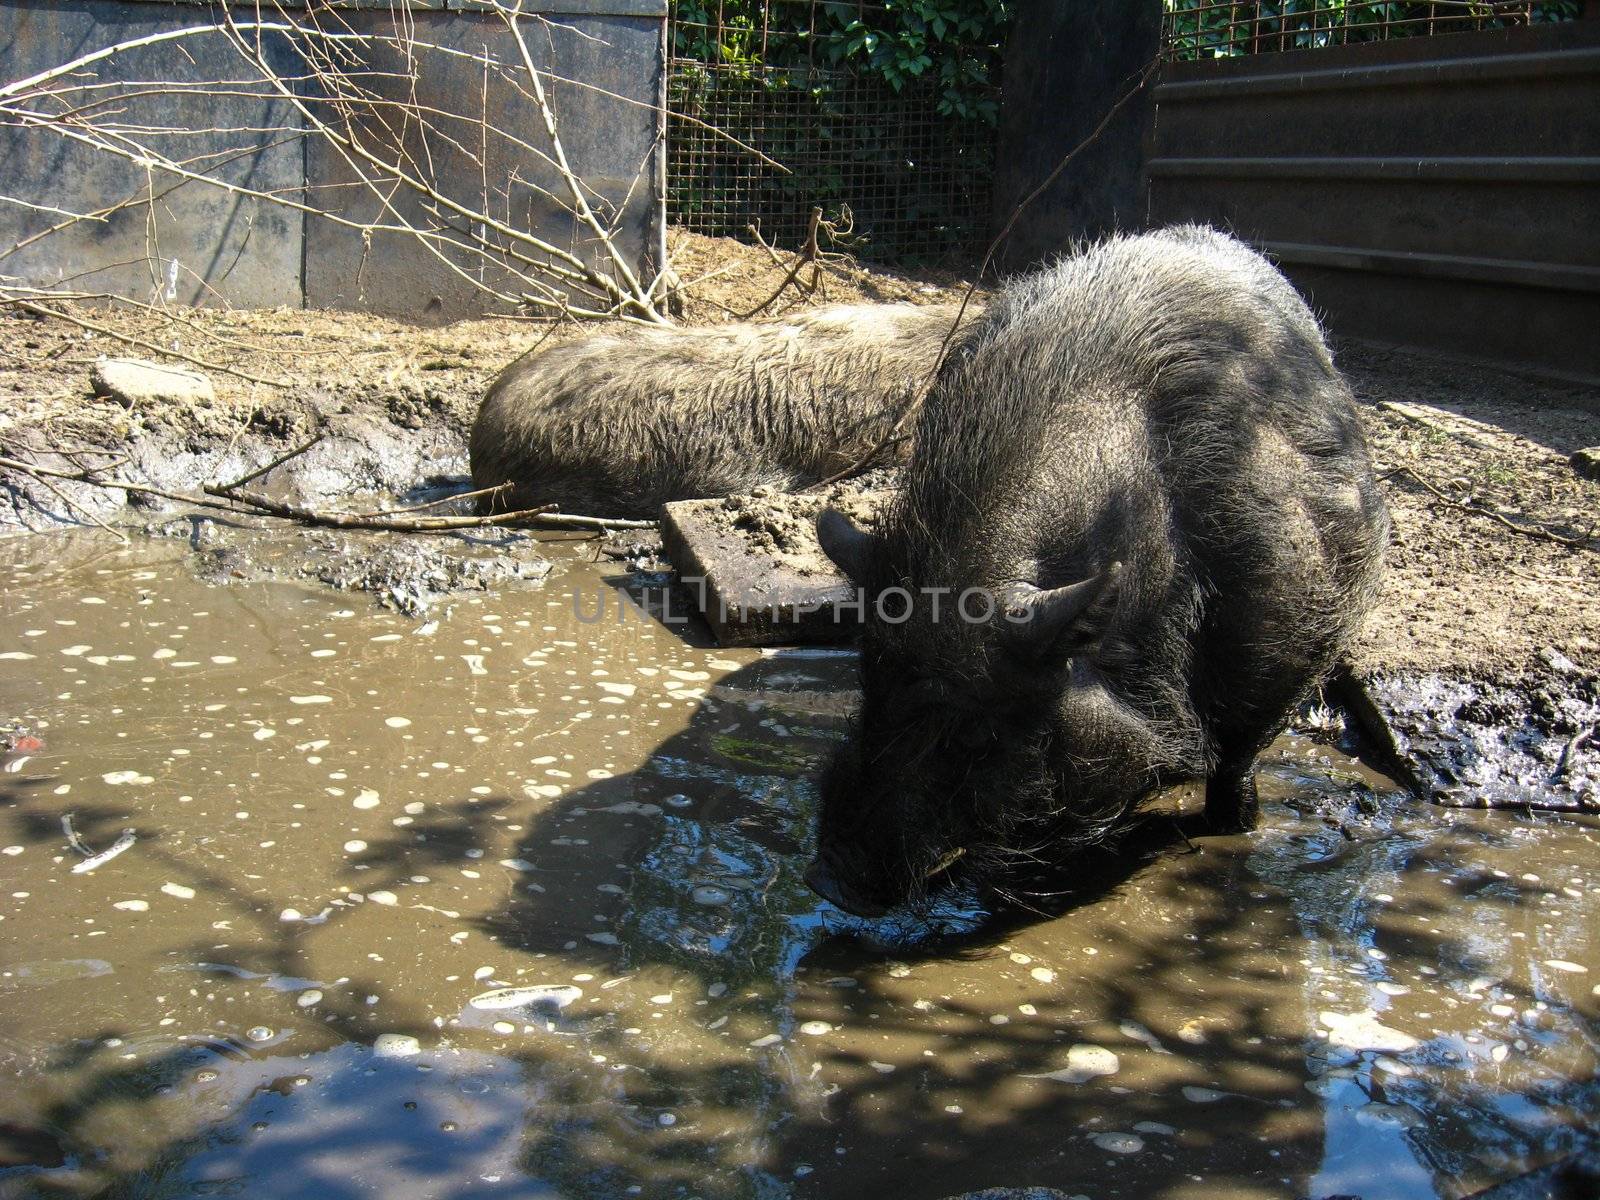 The image of a pair of pigs on a farm